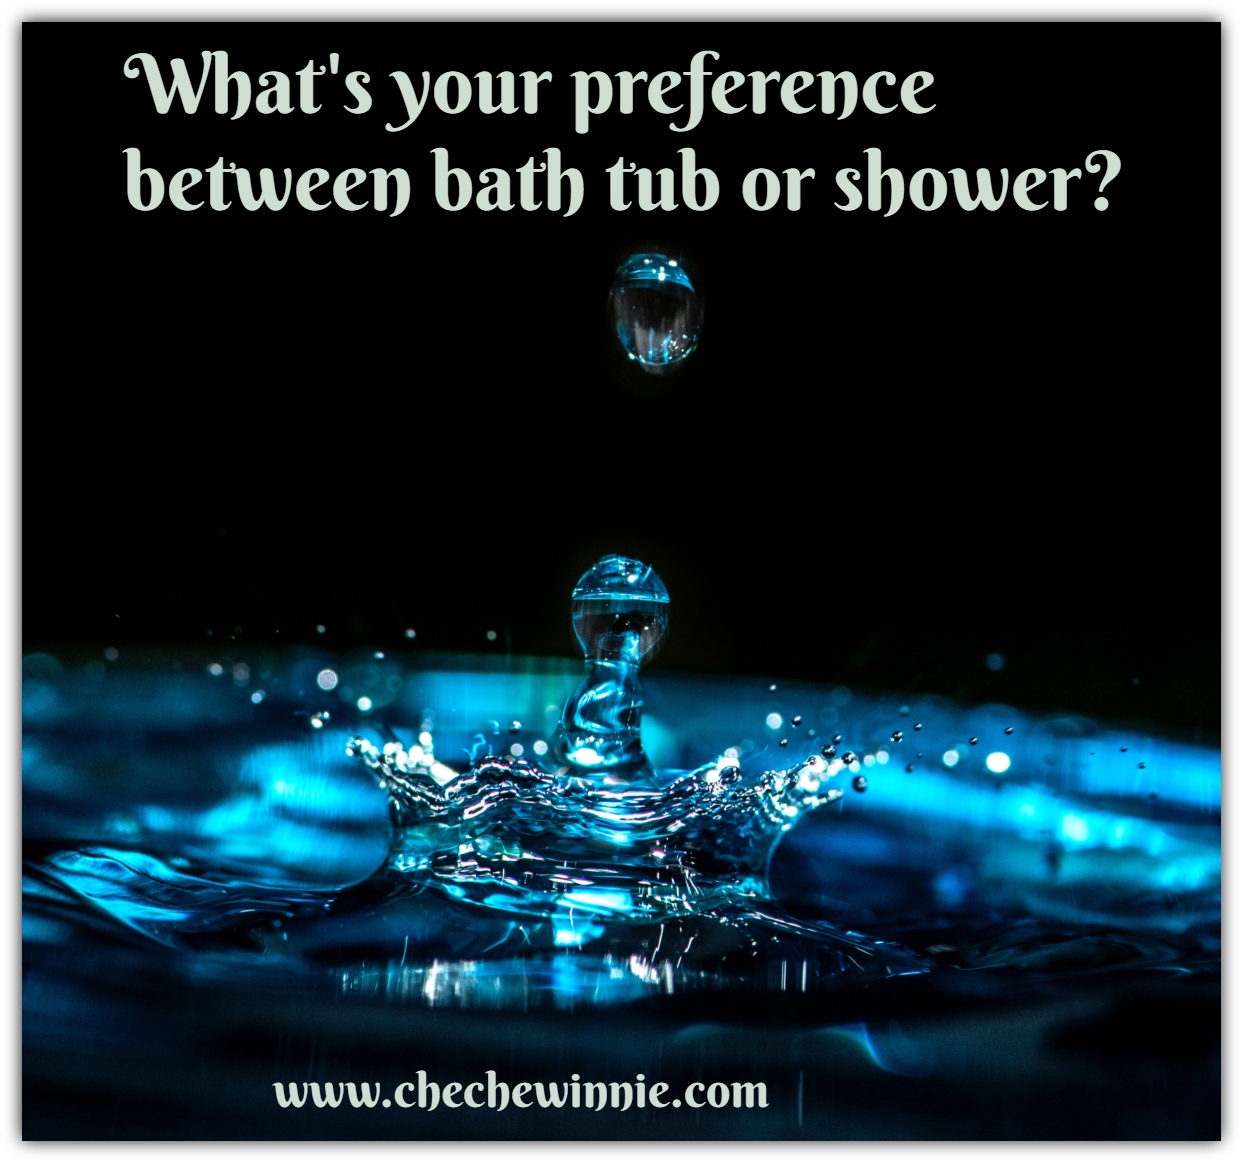 What's your preference between bathtub or shower?